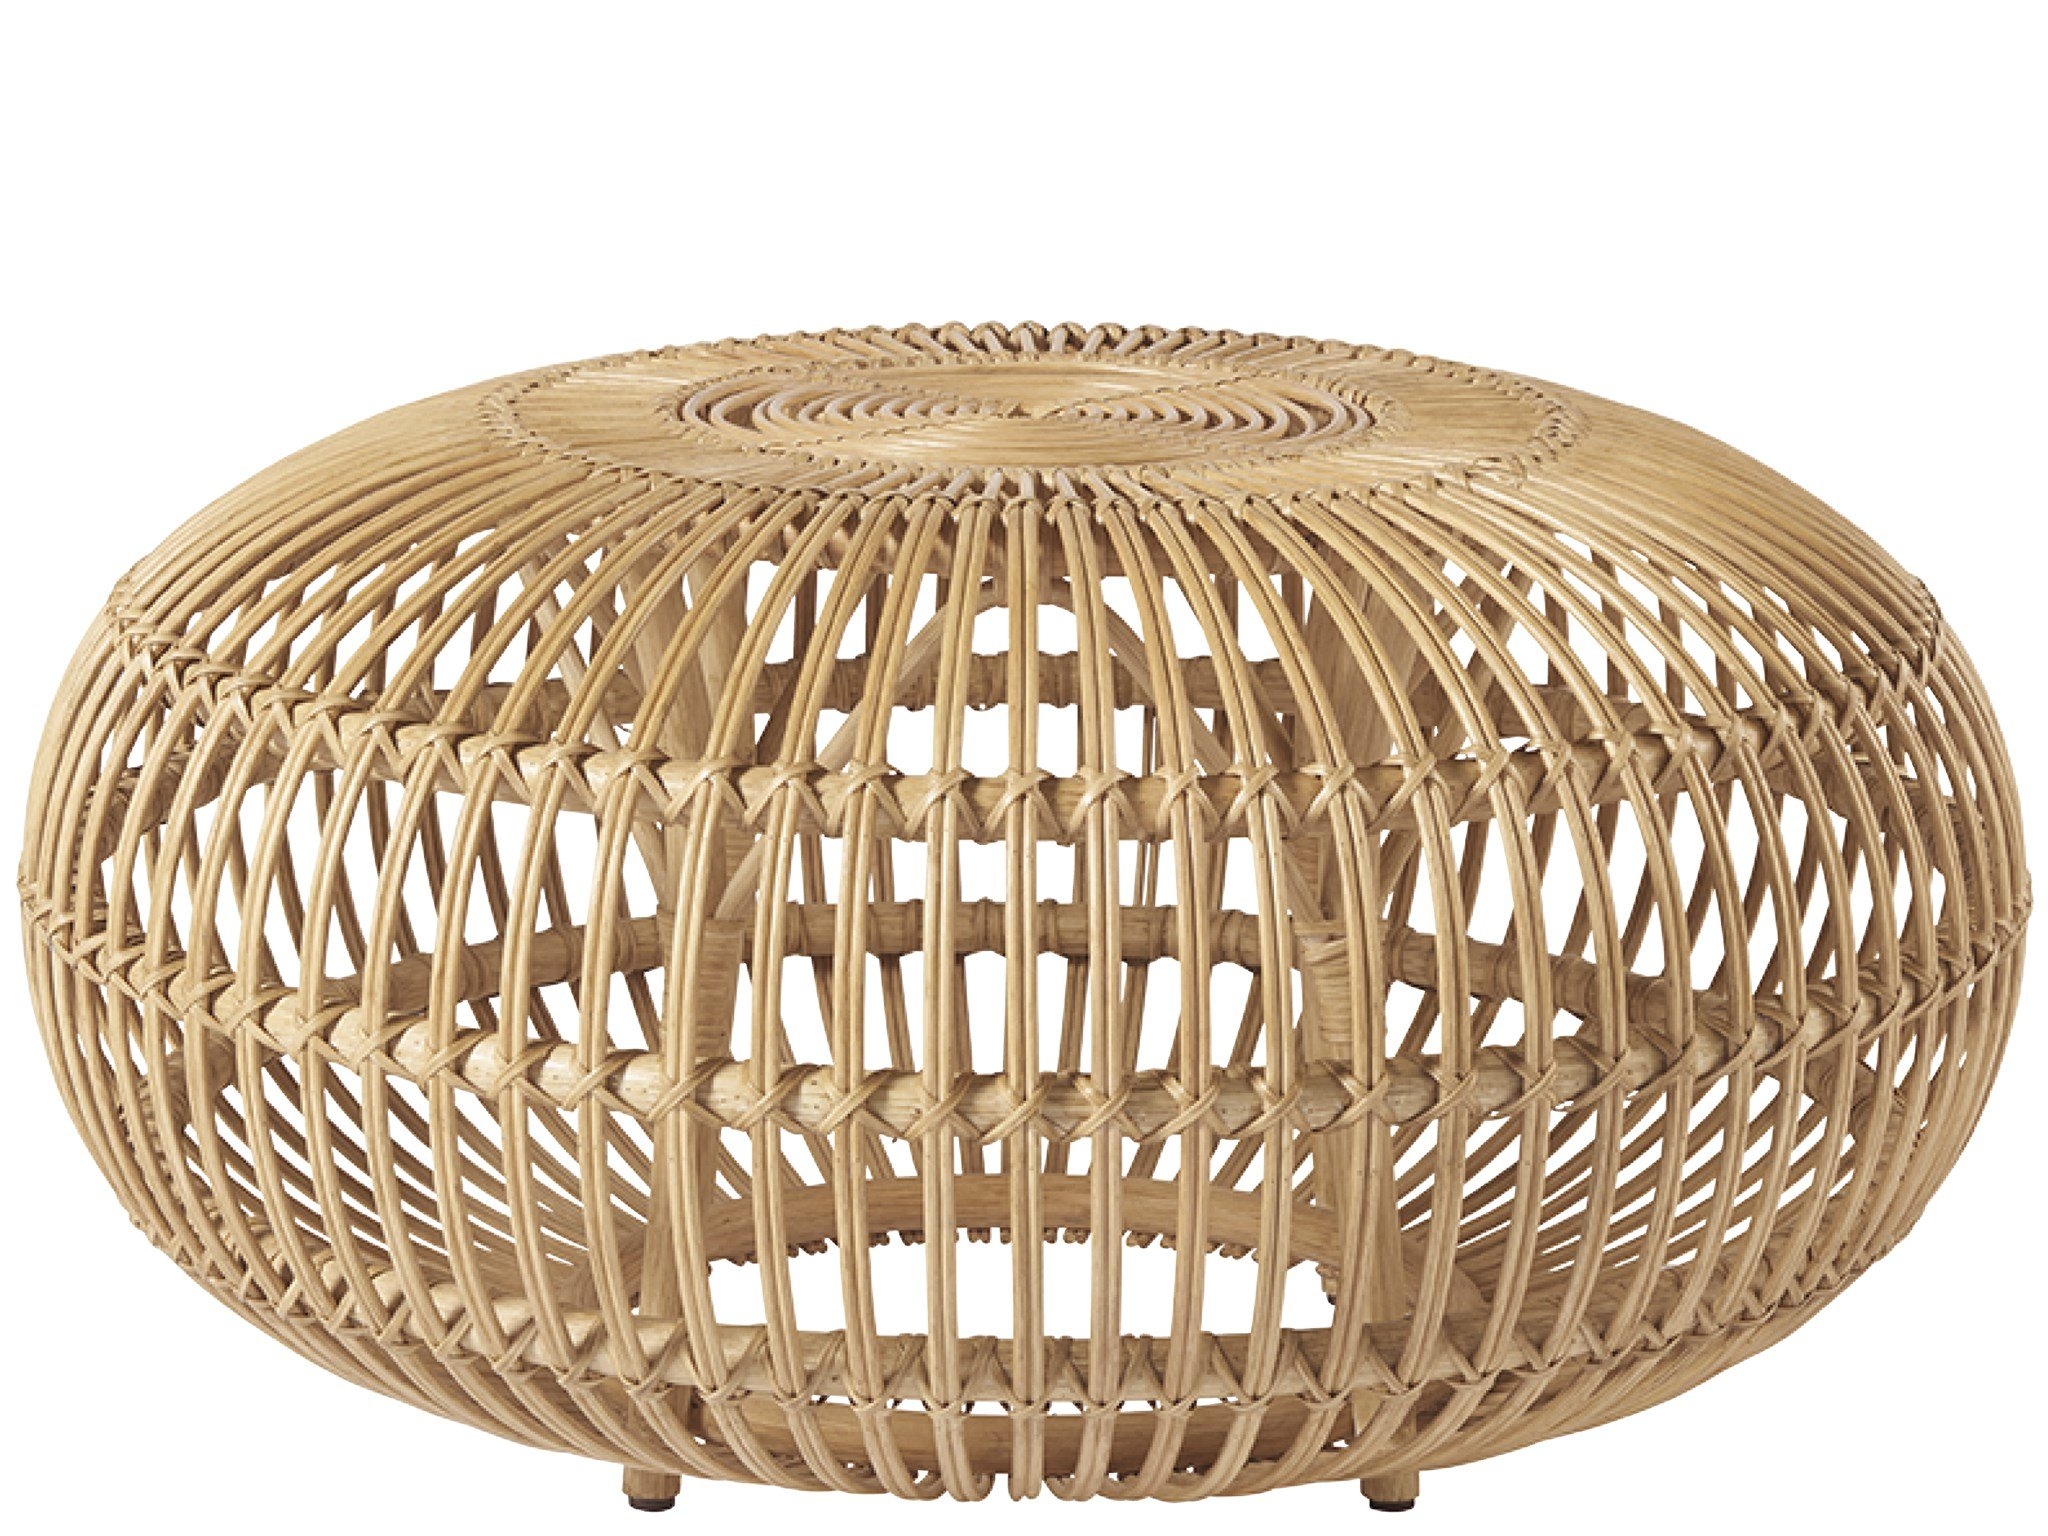 Rattan Scatter Table - Image 1